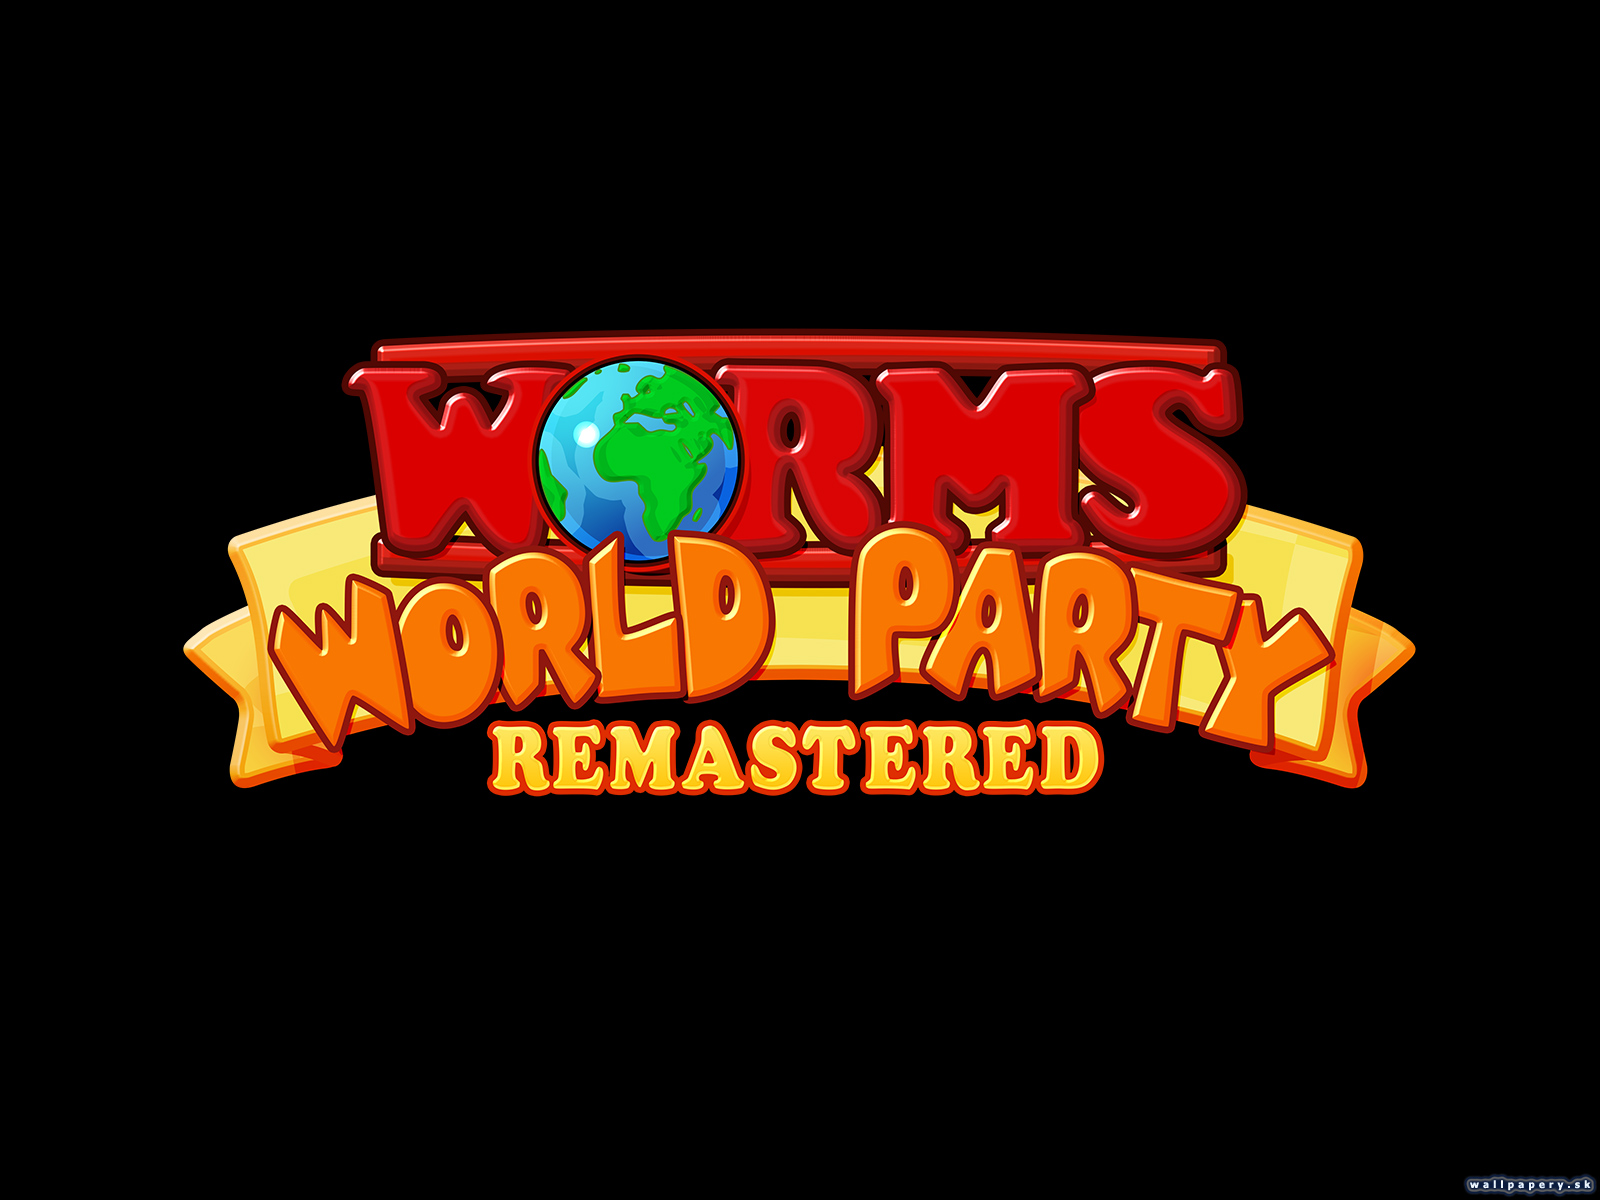 Worms World Party Remastered - wallpaper 2